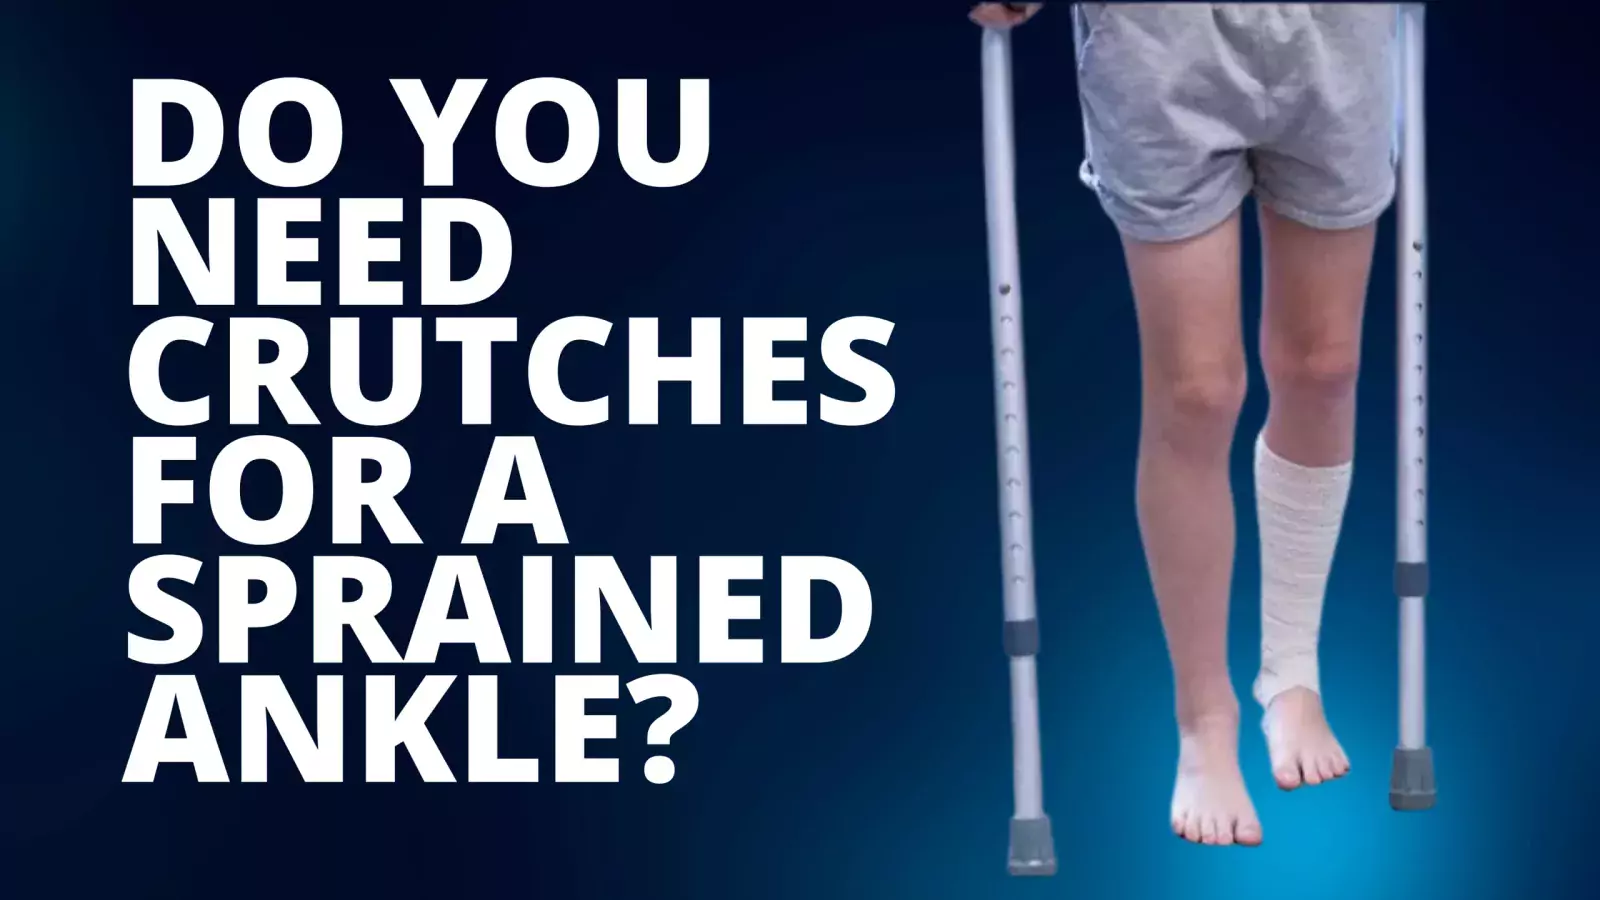 Do You Need Crutches for a Sprained Ankle?